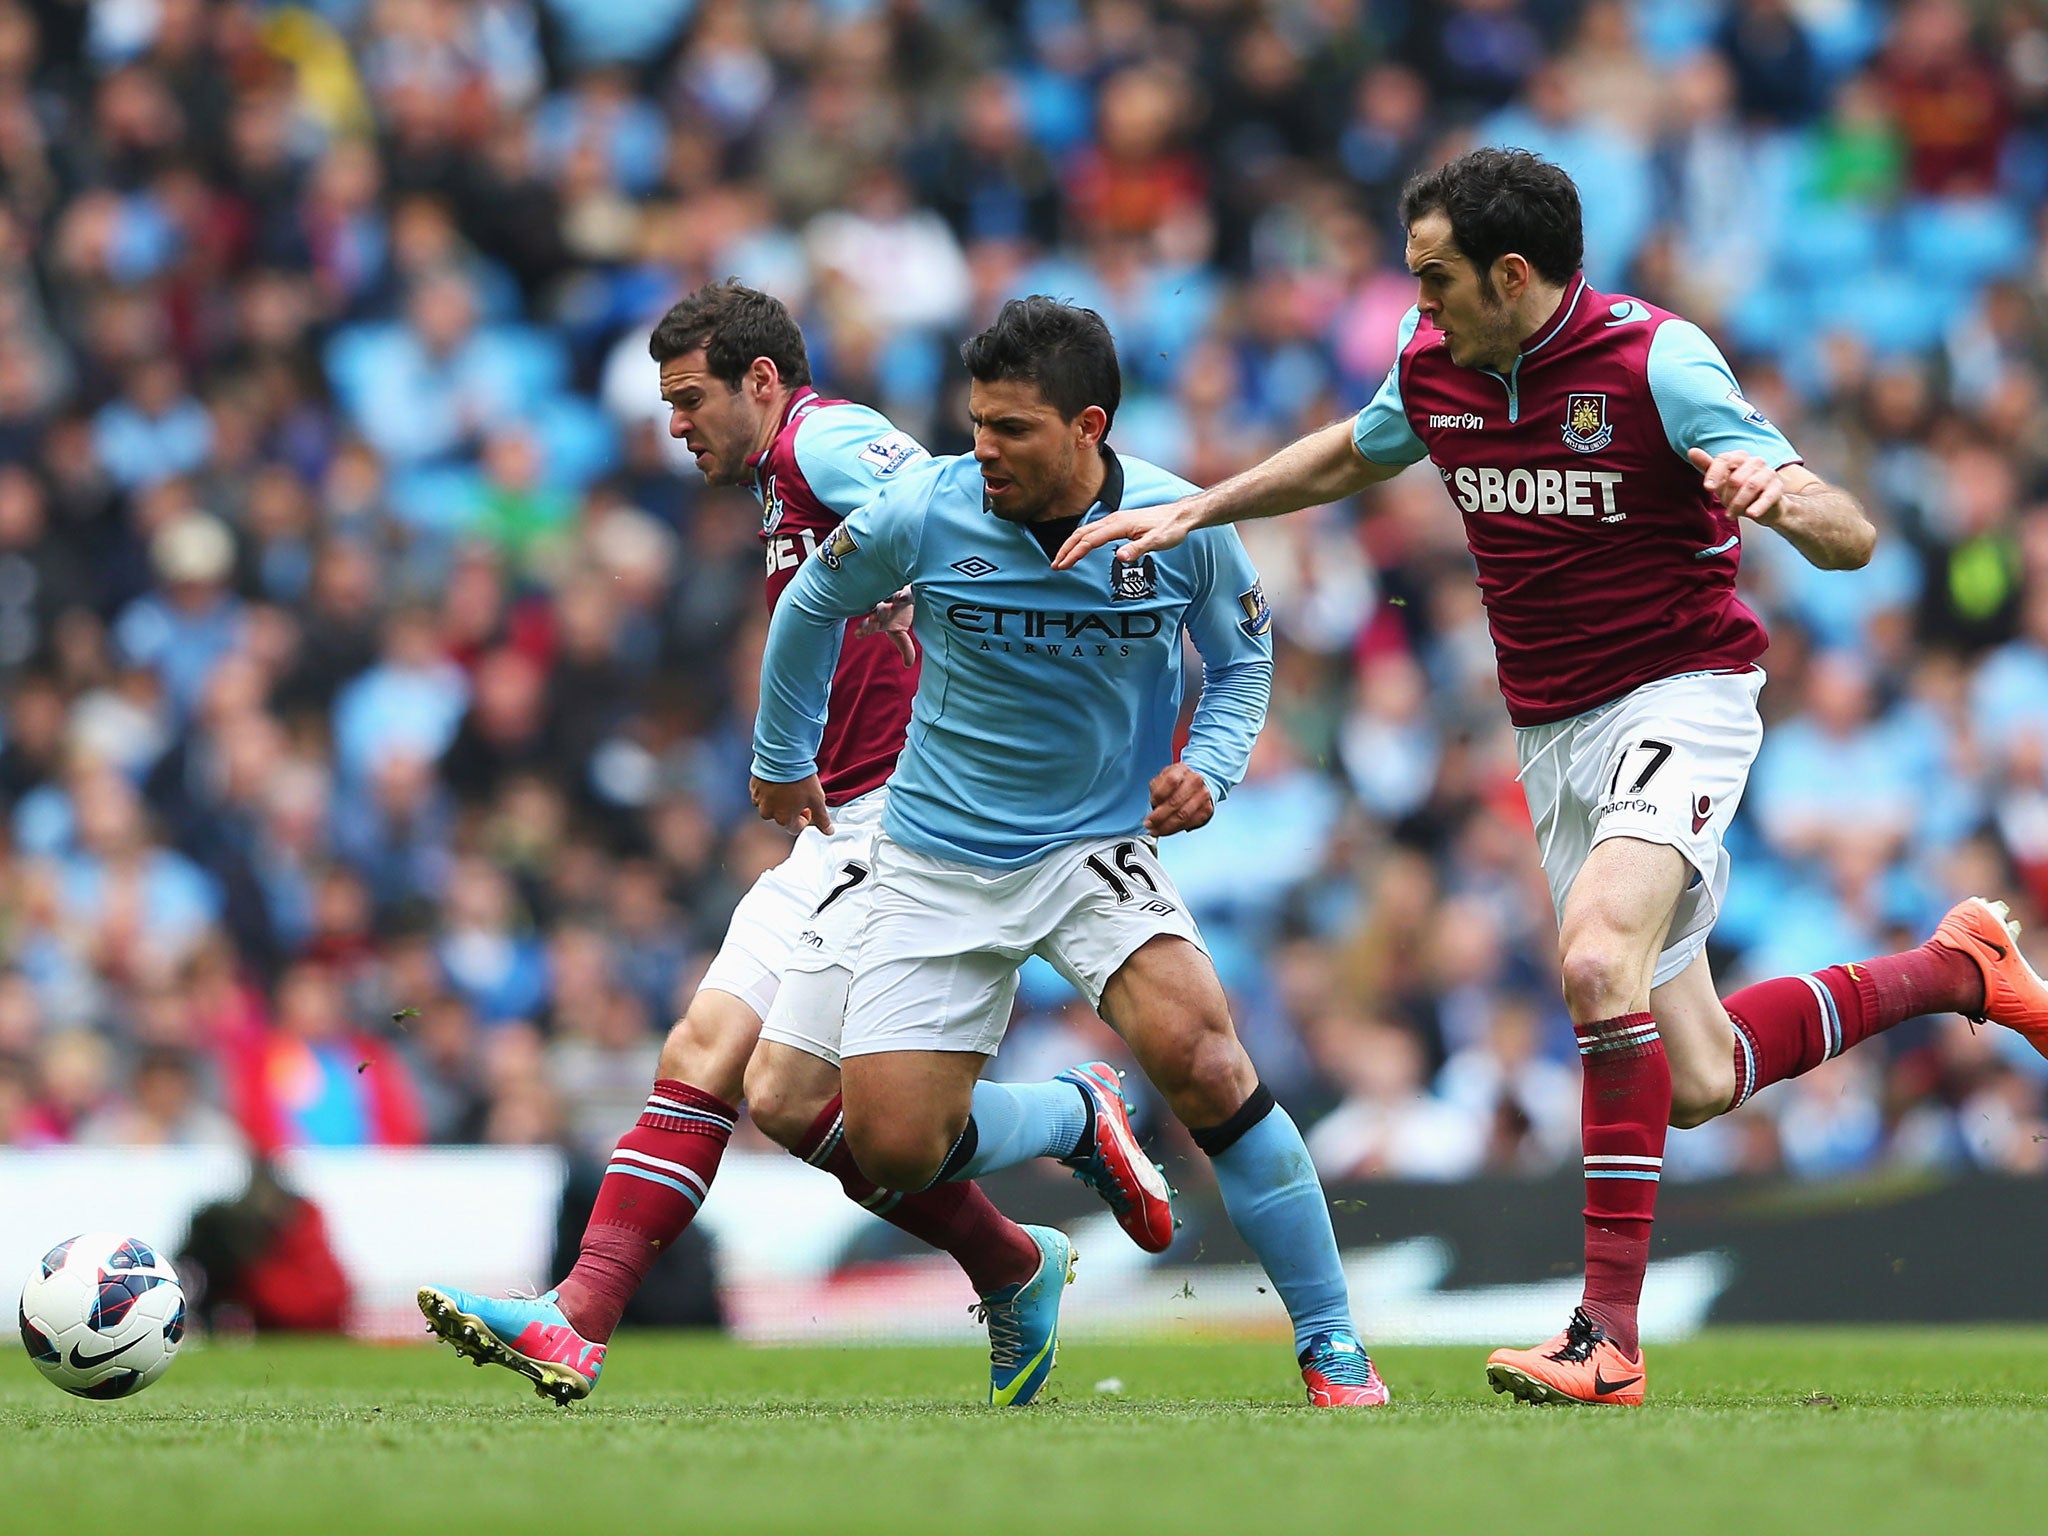 Sergio Aguero of Manchester City is challenged by Matt Jarvis (L) and Joey O'Brien of West Ham United